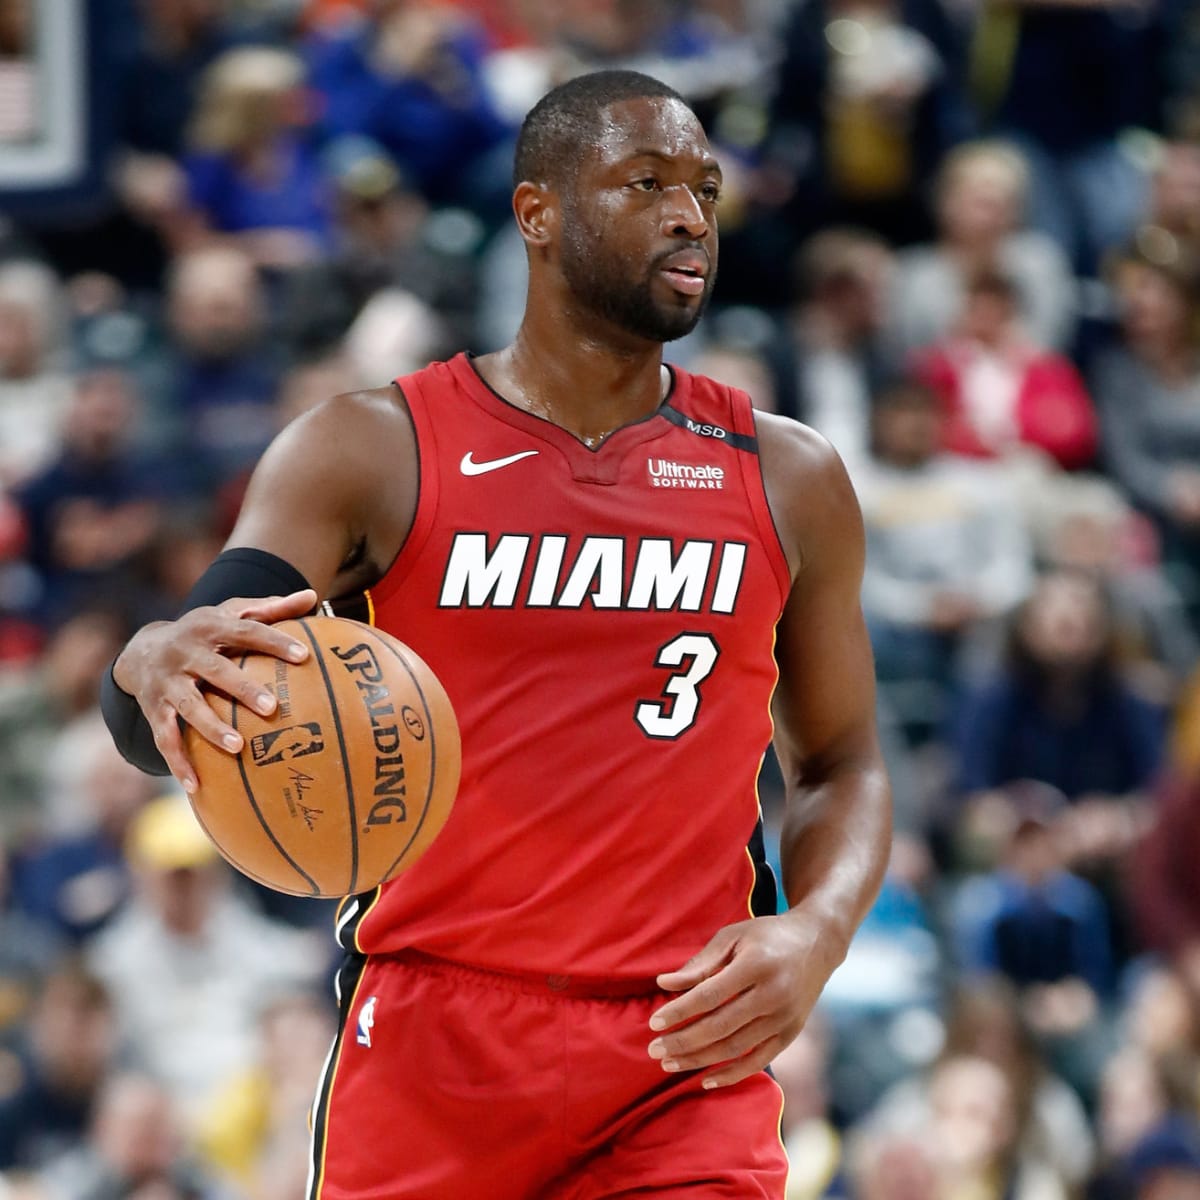 Dwyane Wade's newly found 3-point shot is the key to the Bulls